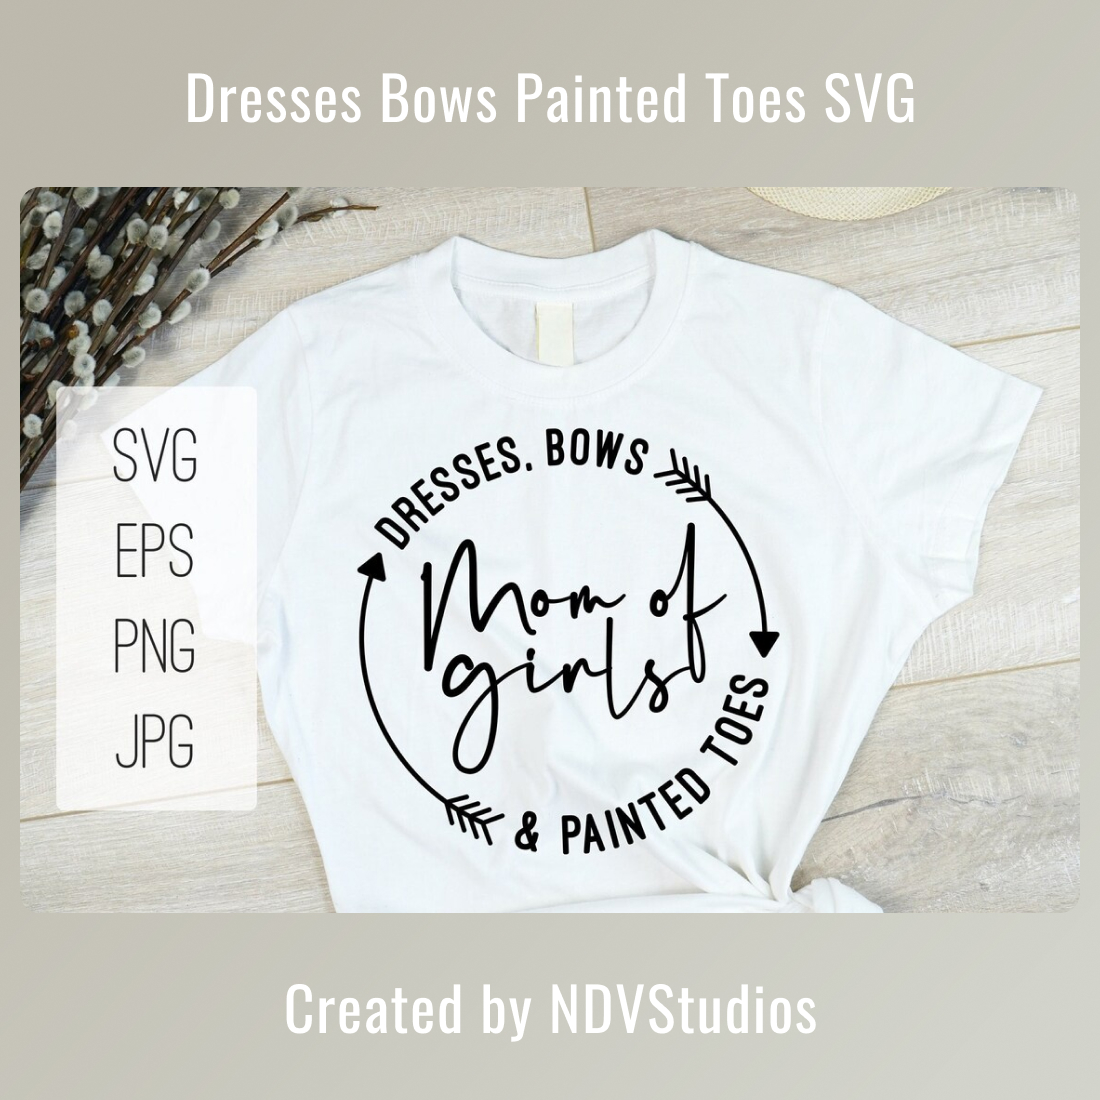 Dresses Bows Painted Toes SVG main cover.